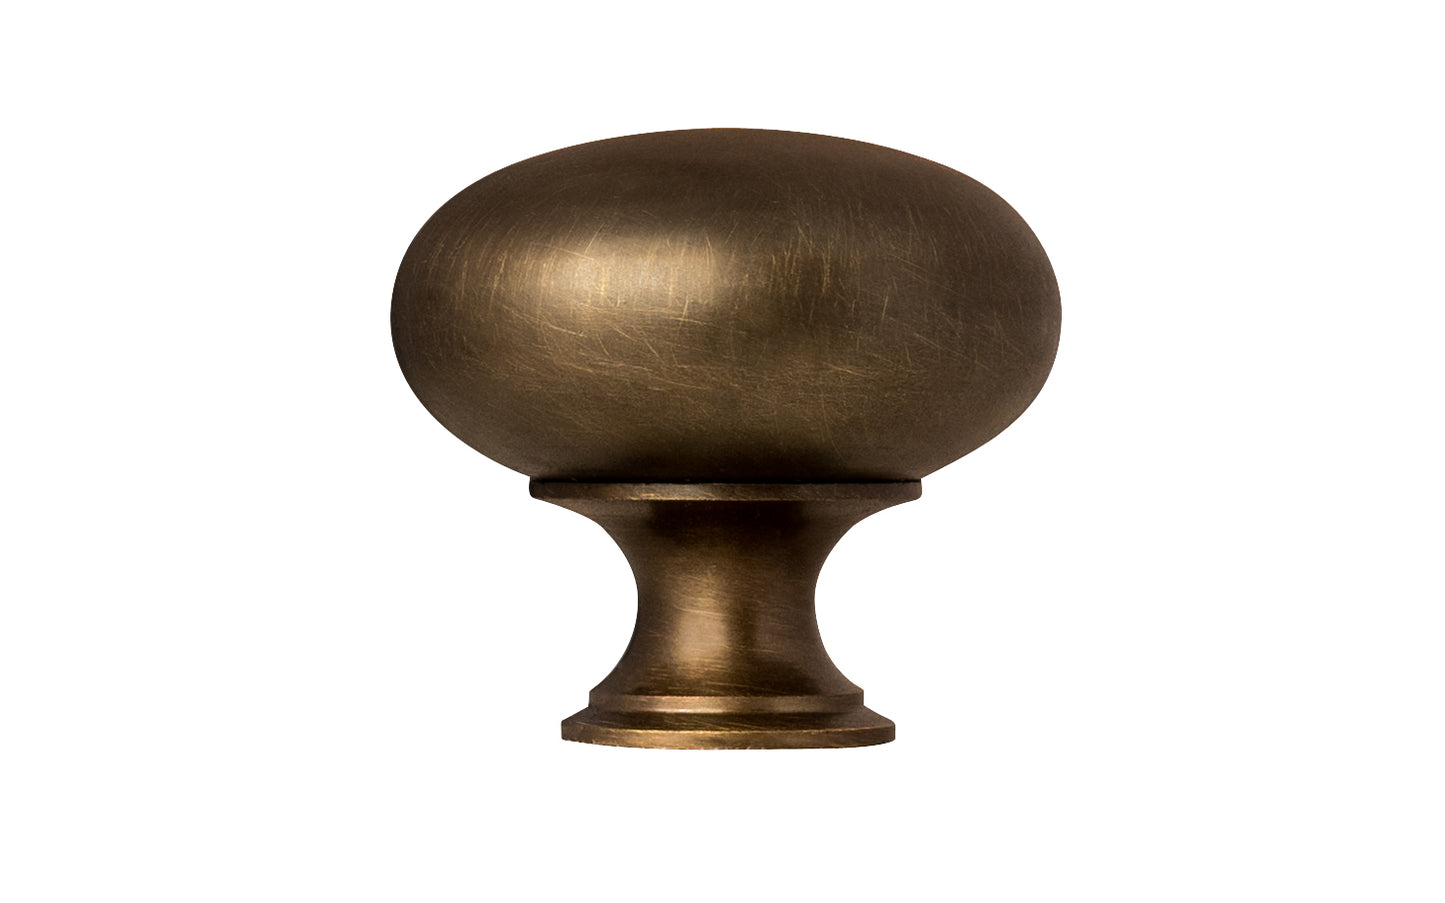 Vintage-style Hardware · Traditional & Classic 1-1/2" Diameter Brass Knob with an Antique Brass Finish. Made of high quality brass, this stylish round cabinet knob has a smooth look & feel on a pedestal shaped base. Works great in kitchens, bathrooms, on furniture, cabinets, drawers. Authentic reproduction hardware.